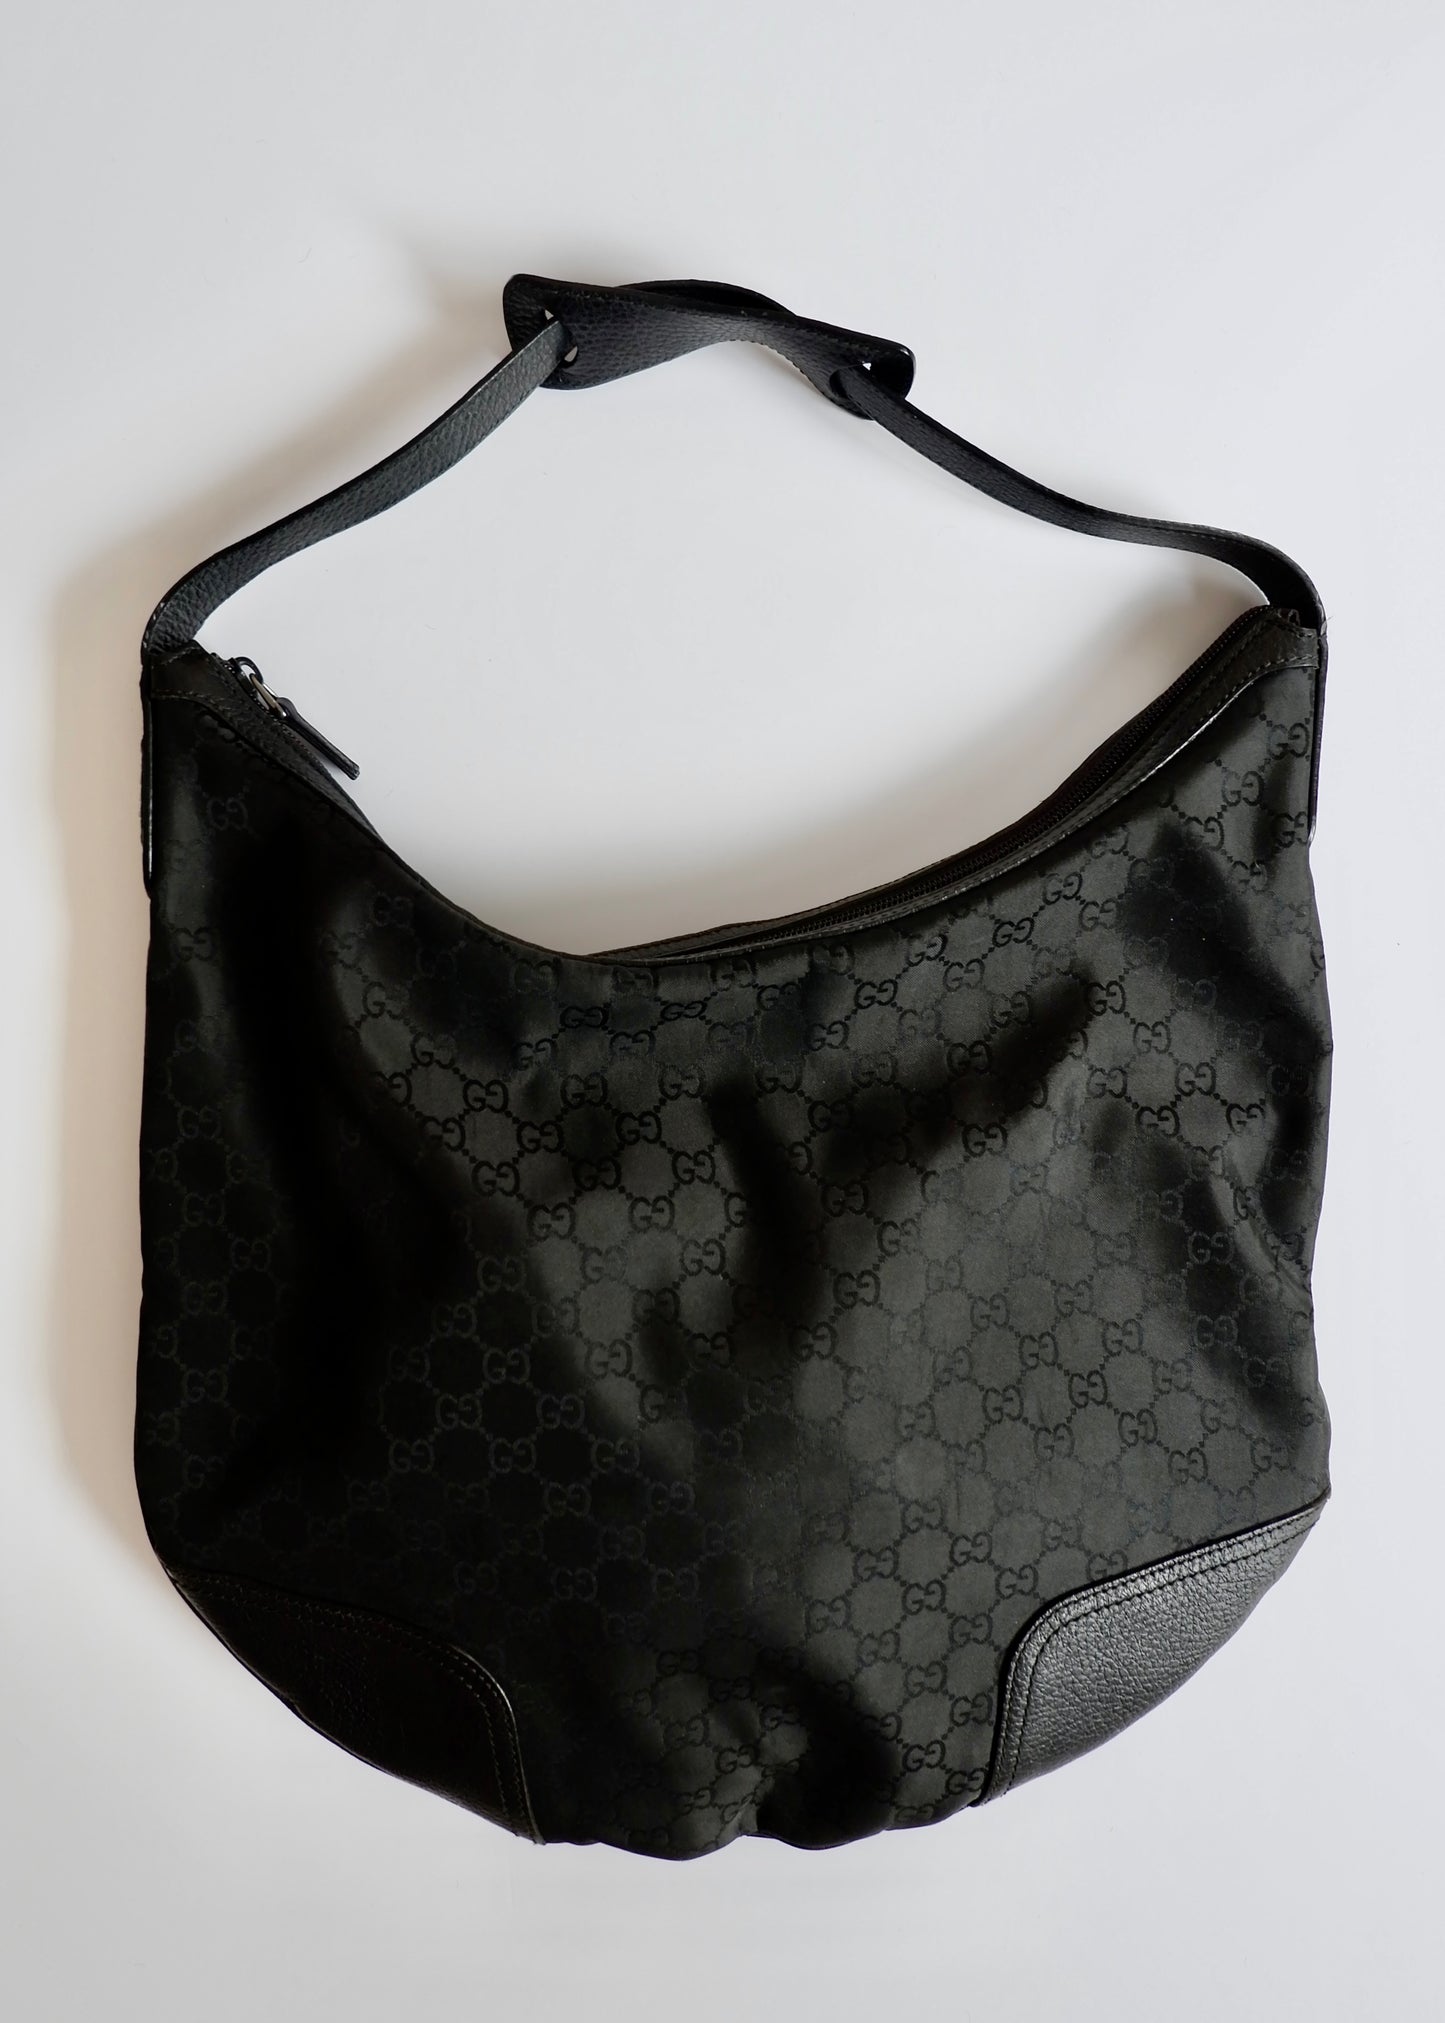 Authentic Preowned Gucci Nylon/Leather Hobo Shoulder Bag